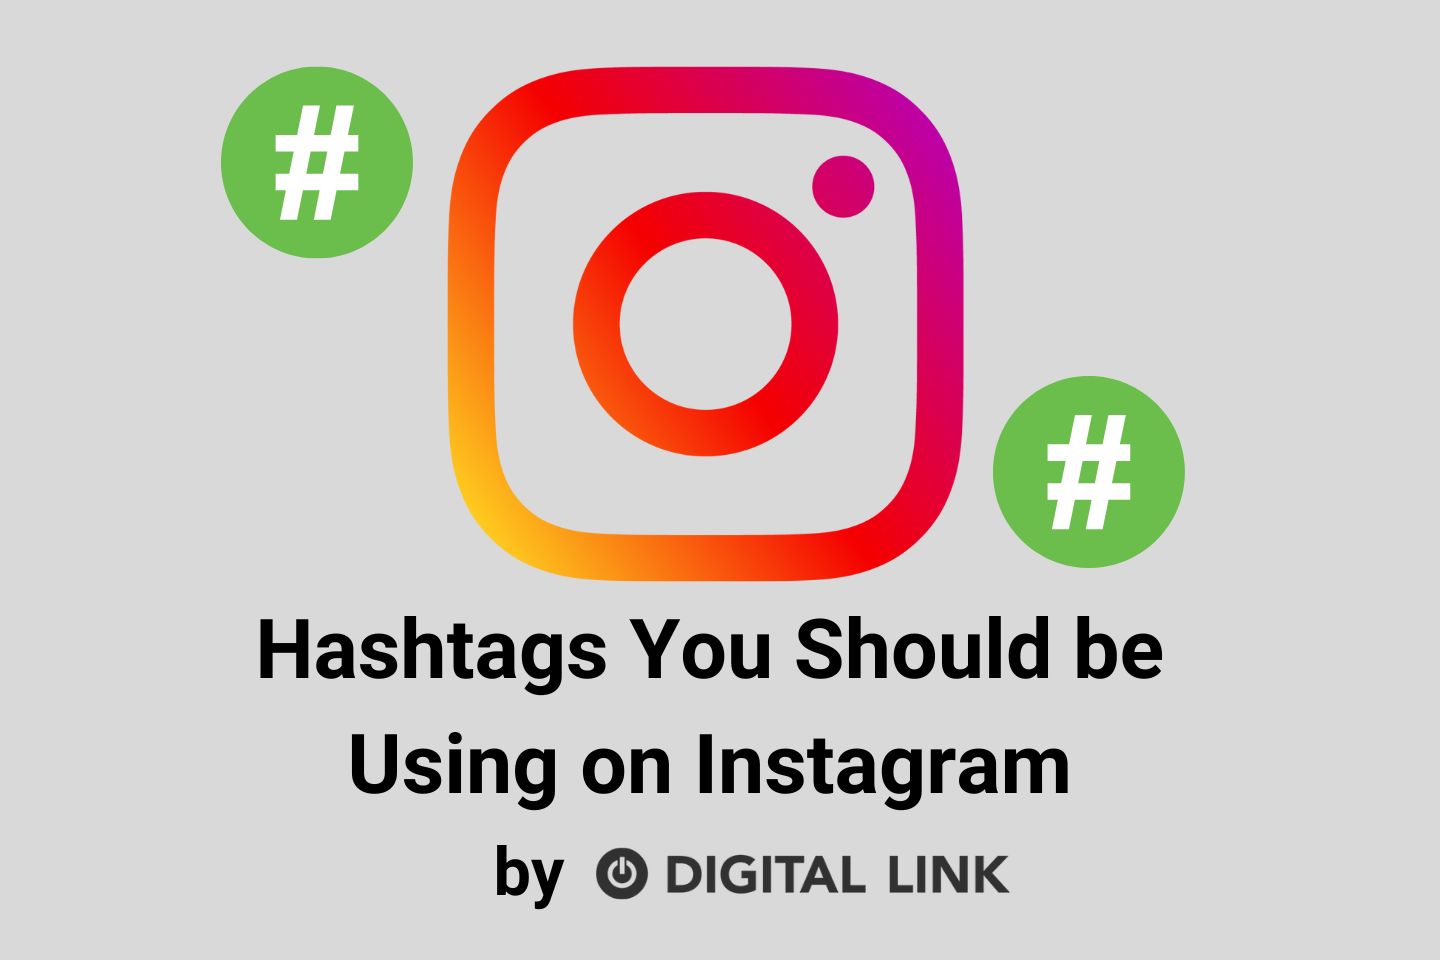 Hashtags you should be using on Instagram